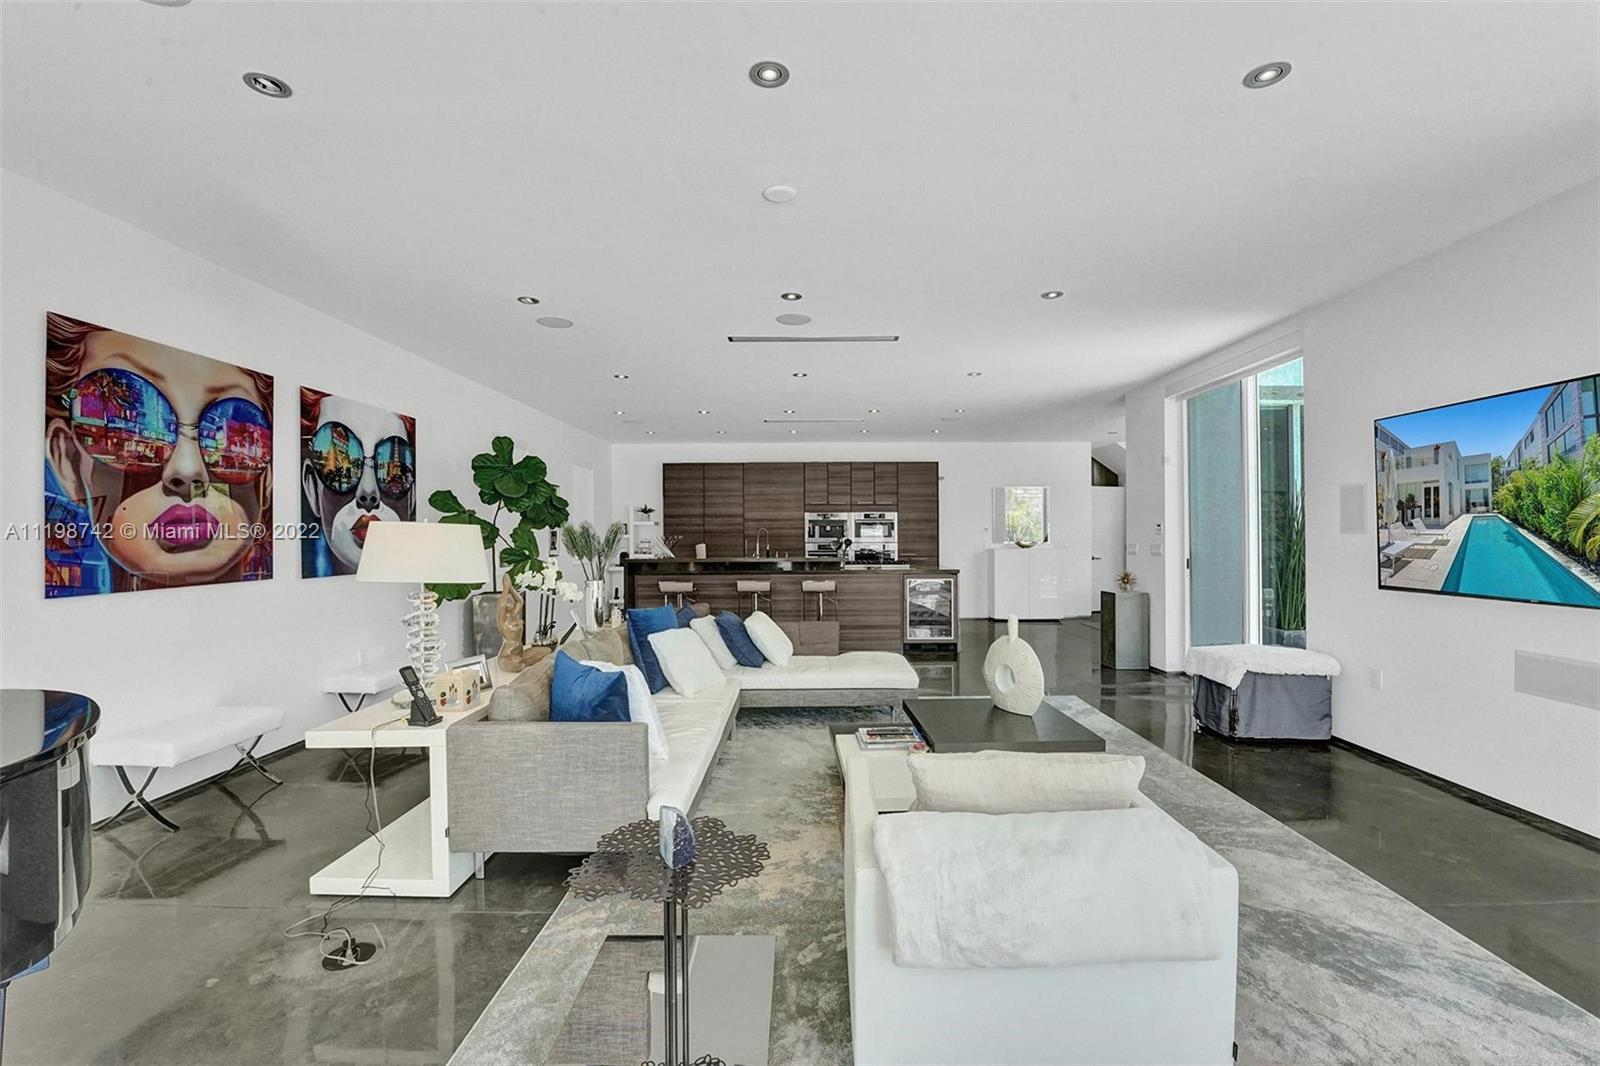 Contemporary Home for Sale in Fort Lauderdale!  One of a kind 4 Beds 4.5 Baths on 3,254 sqft. This m